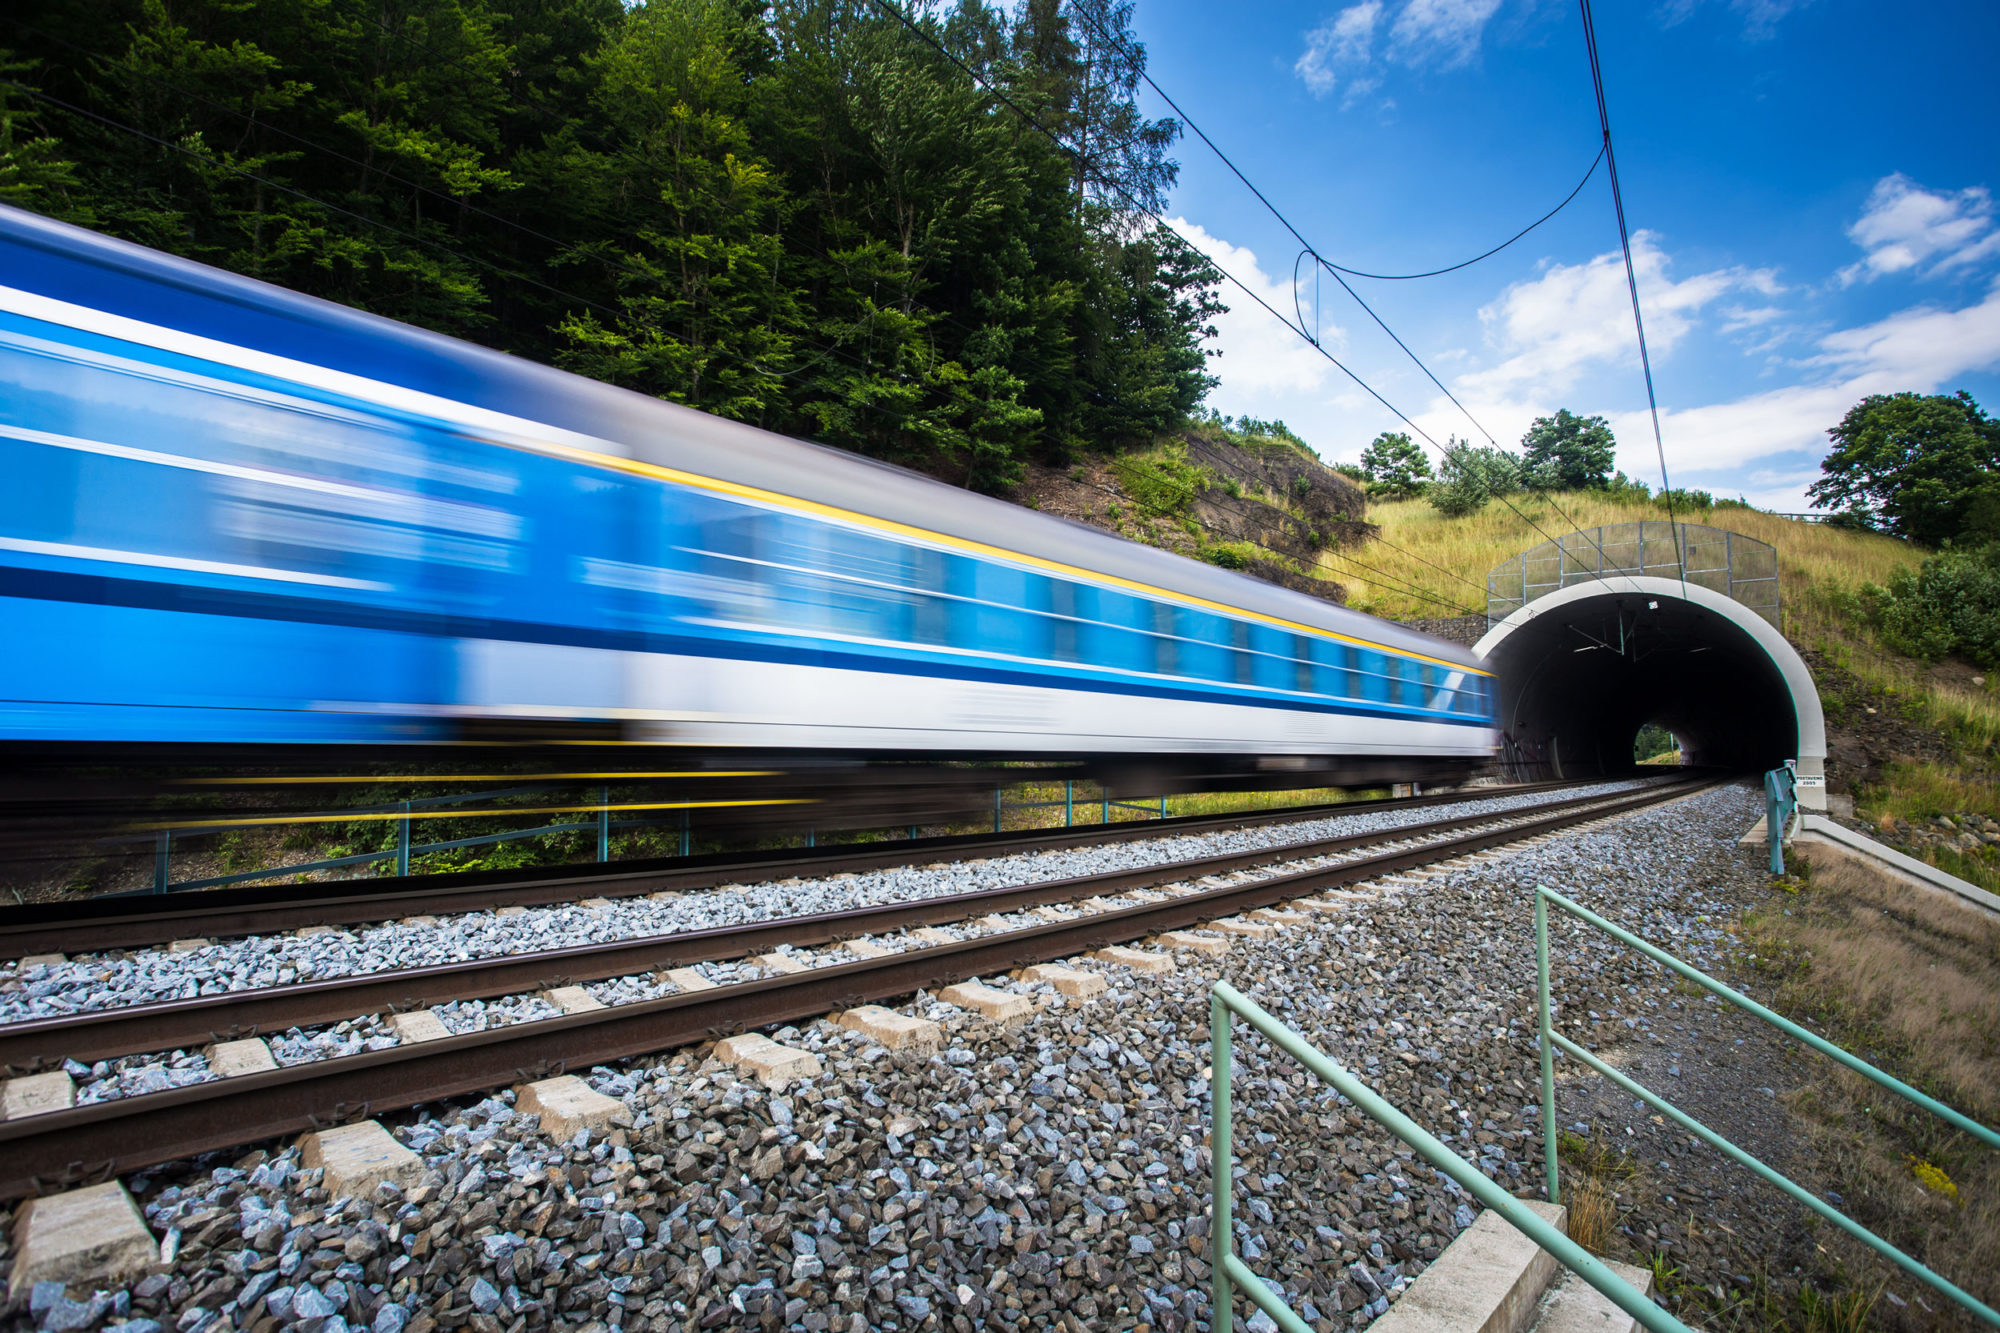 High-speed trains on their way into a tunnel.